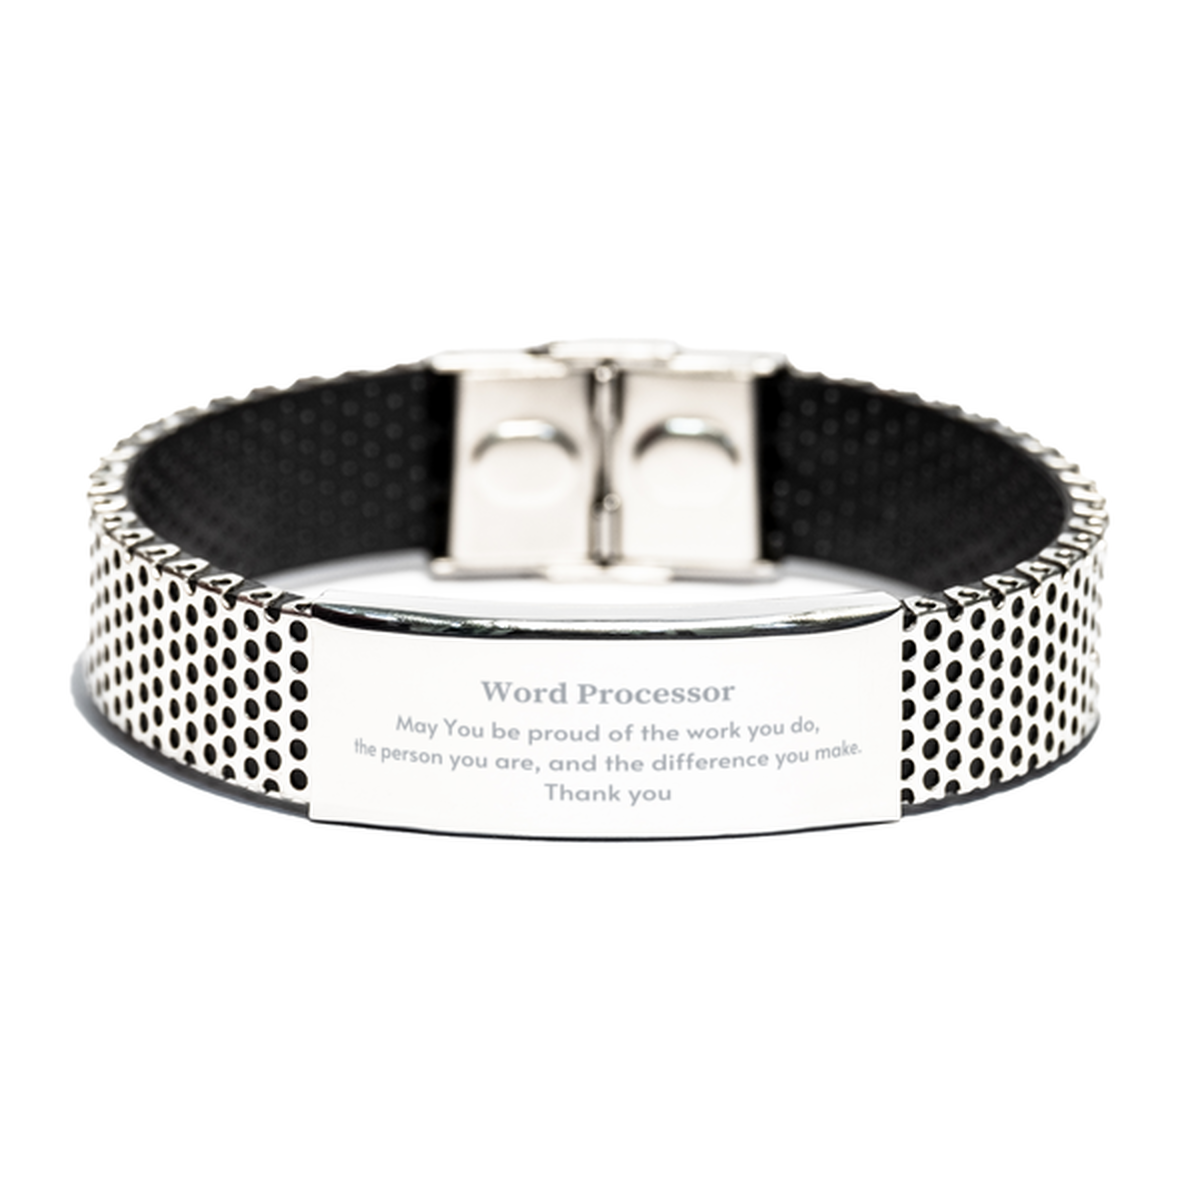 Heartwarming Stainless Steel Bracelet Retirement Coworkers Gifts for Word Processor, Word Processor May You be proud of the work you do, the person you are Gifts for Boss Men Women Friends